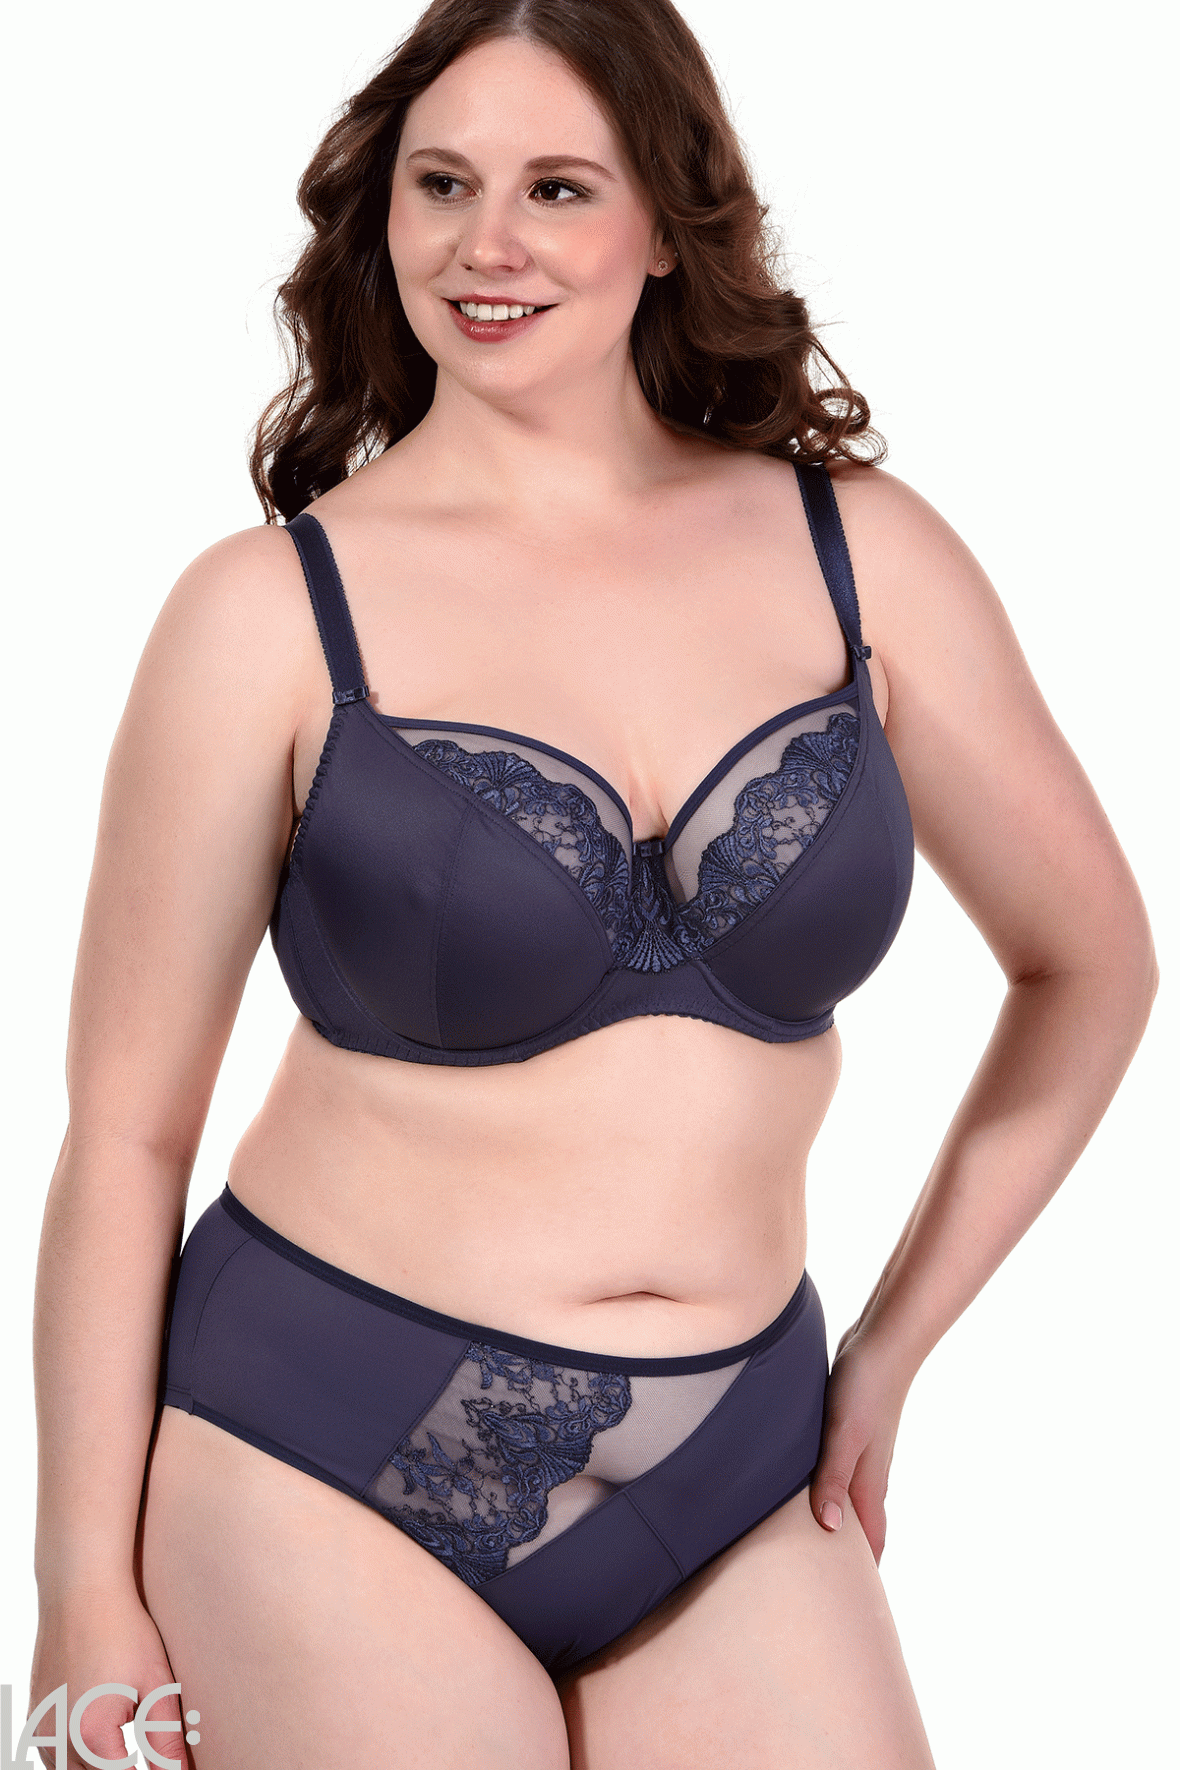 Gorsenia Granada K656-GRA Navy Blue Embroidered Non-Padded Underwired Full  Cup Bra 40L (HH UK) 